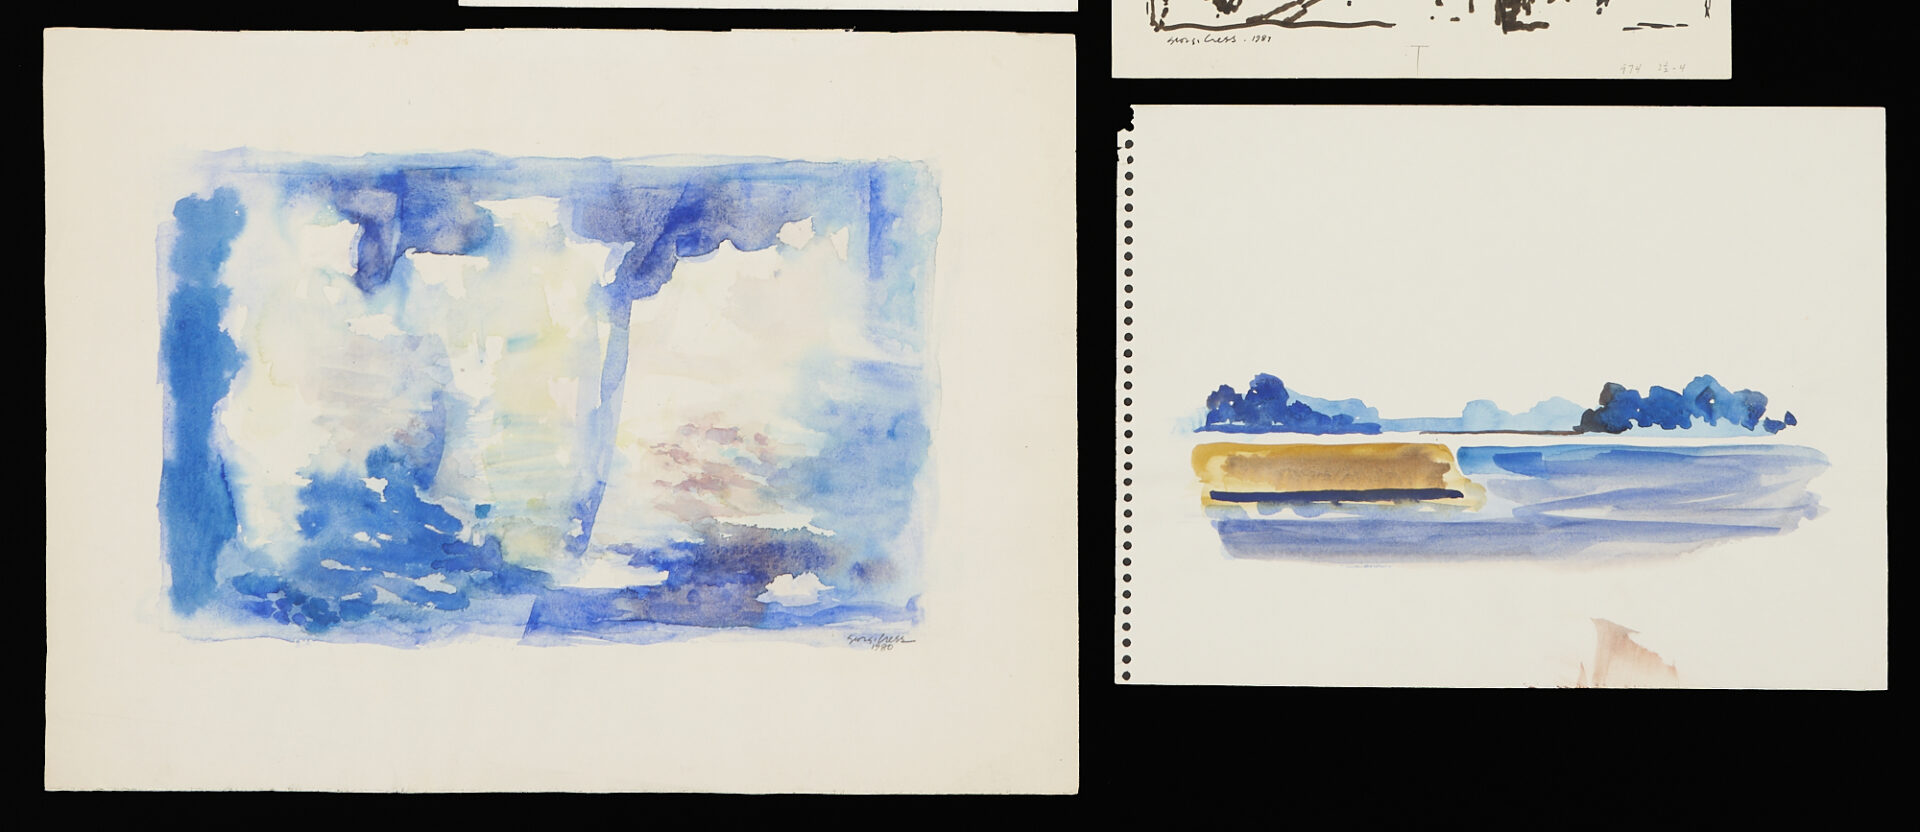 Lot 826: George Cress Abstract W/C paintings & Archive, 15 Items